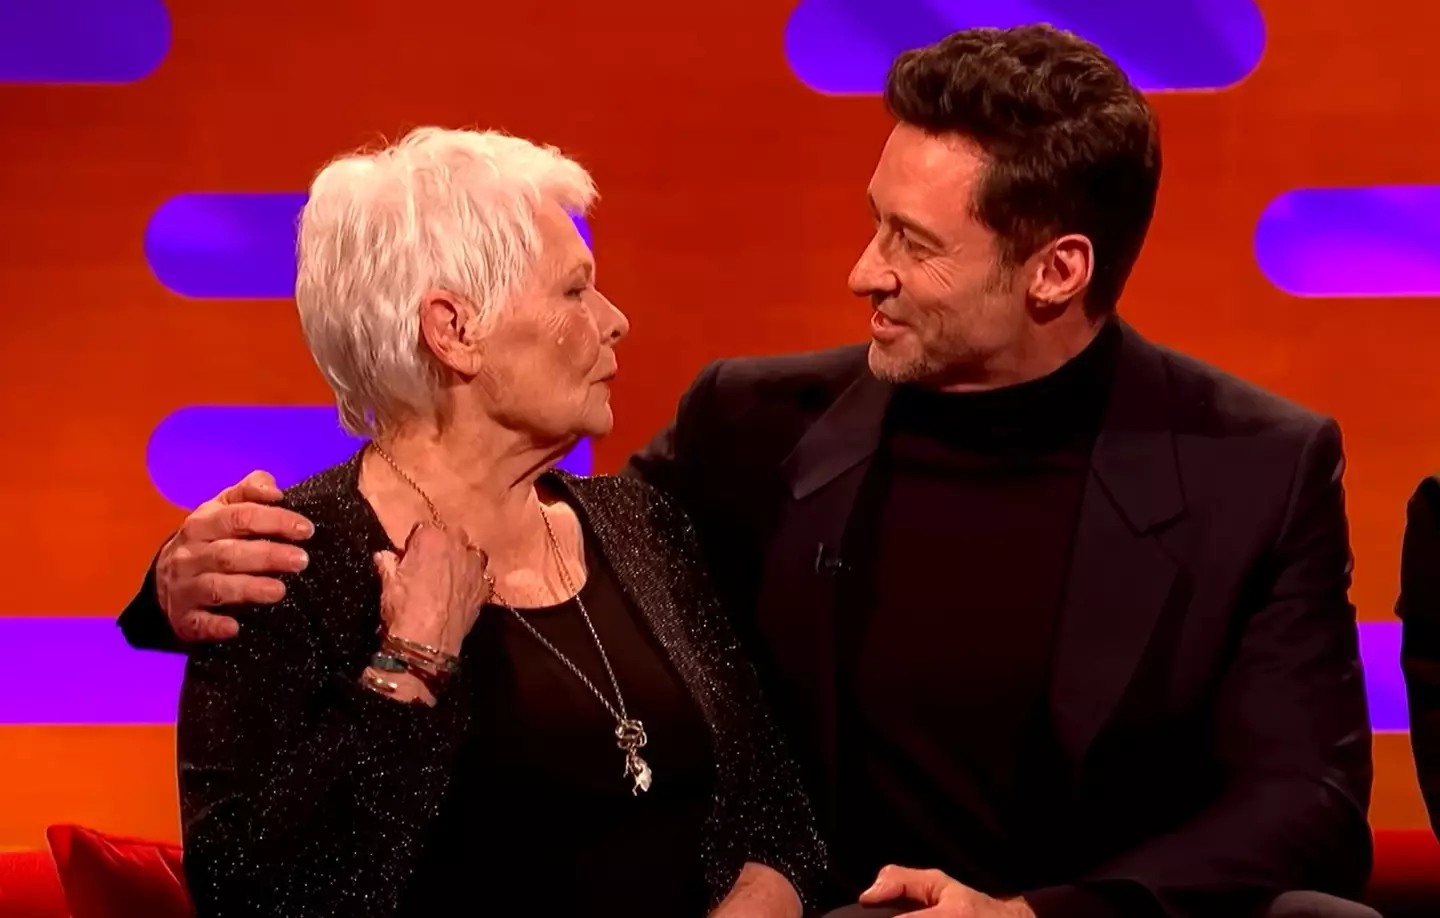 Hugh Jackman said he would have loved to work with Dame Judi Dench, and could have been James Bond.